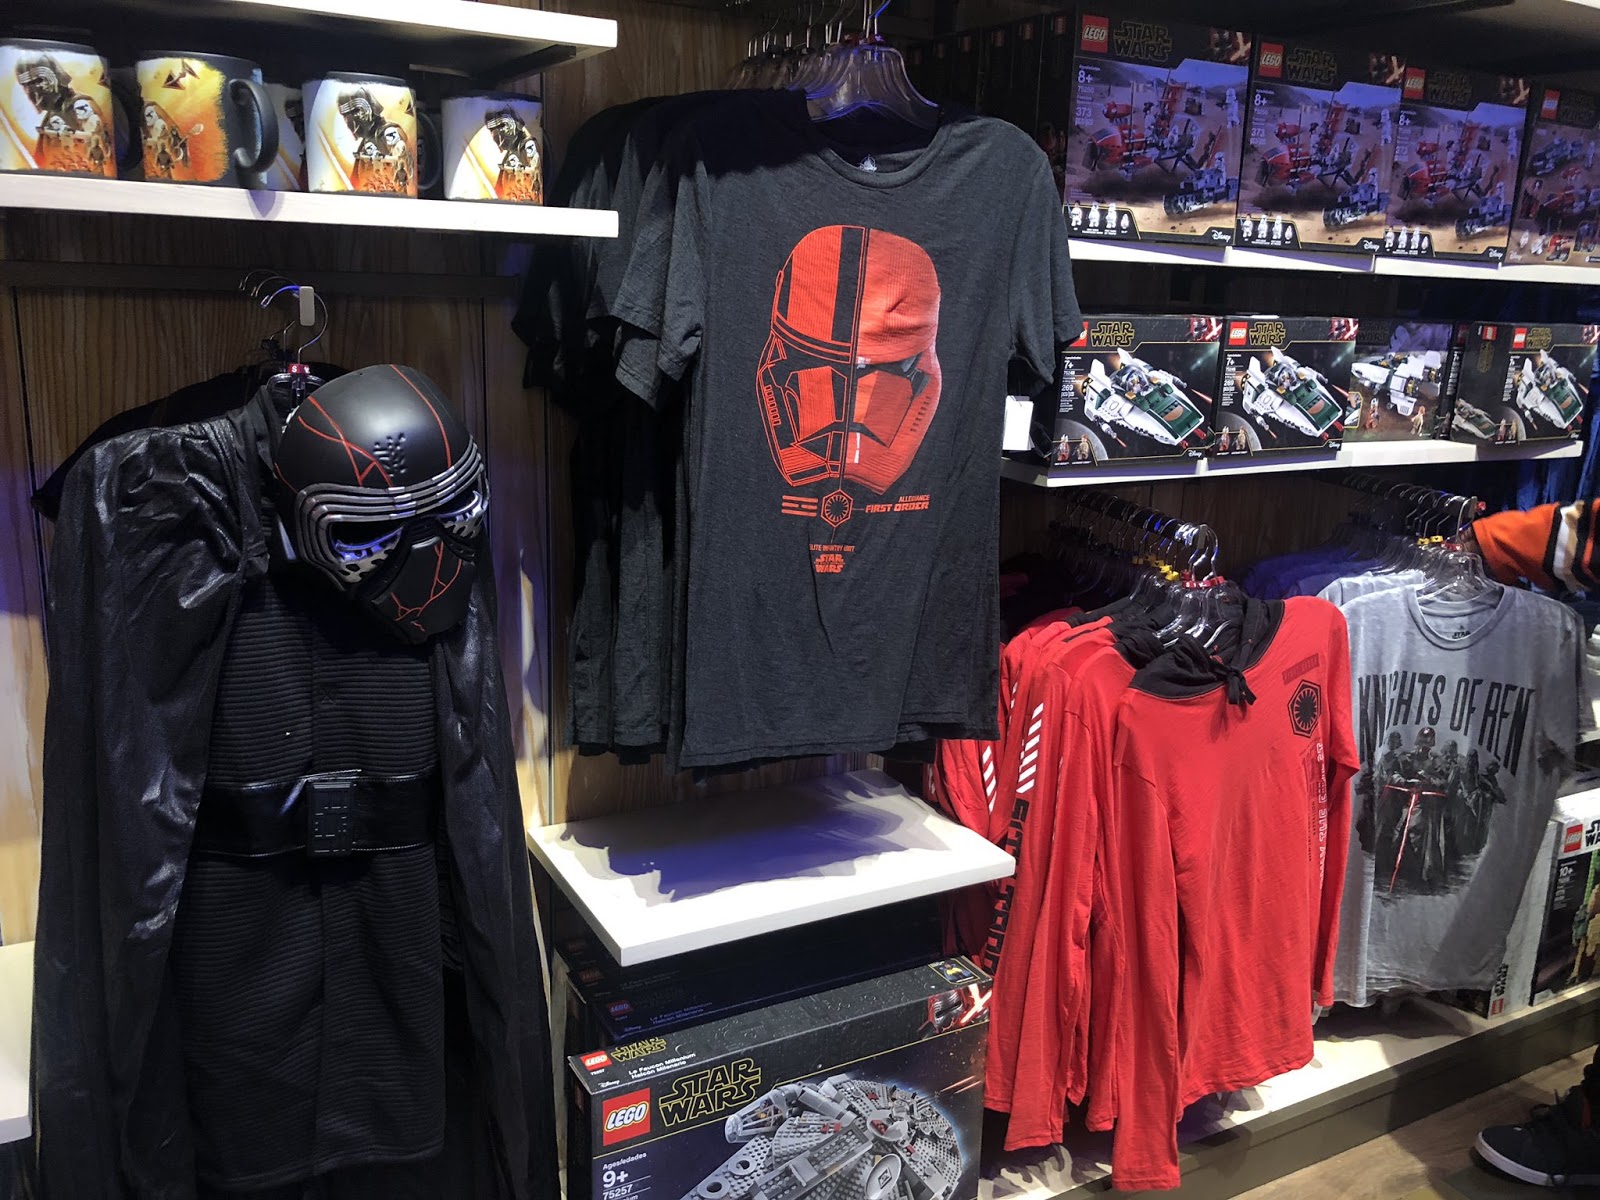 force friday 2019 merchandise